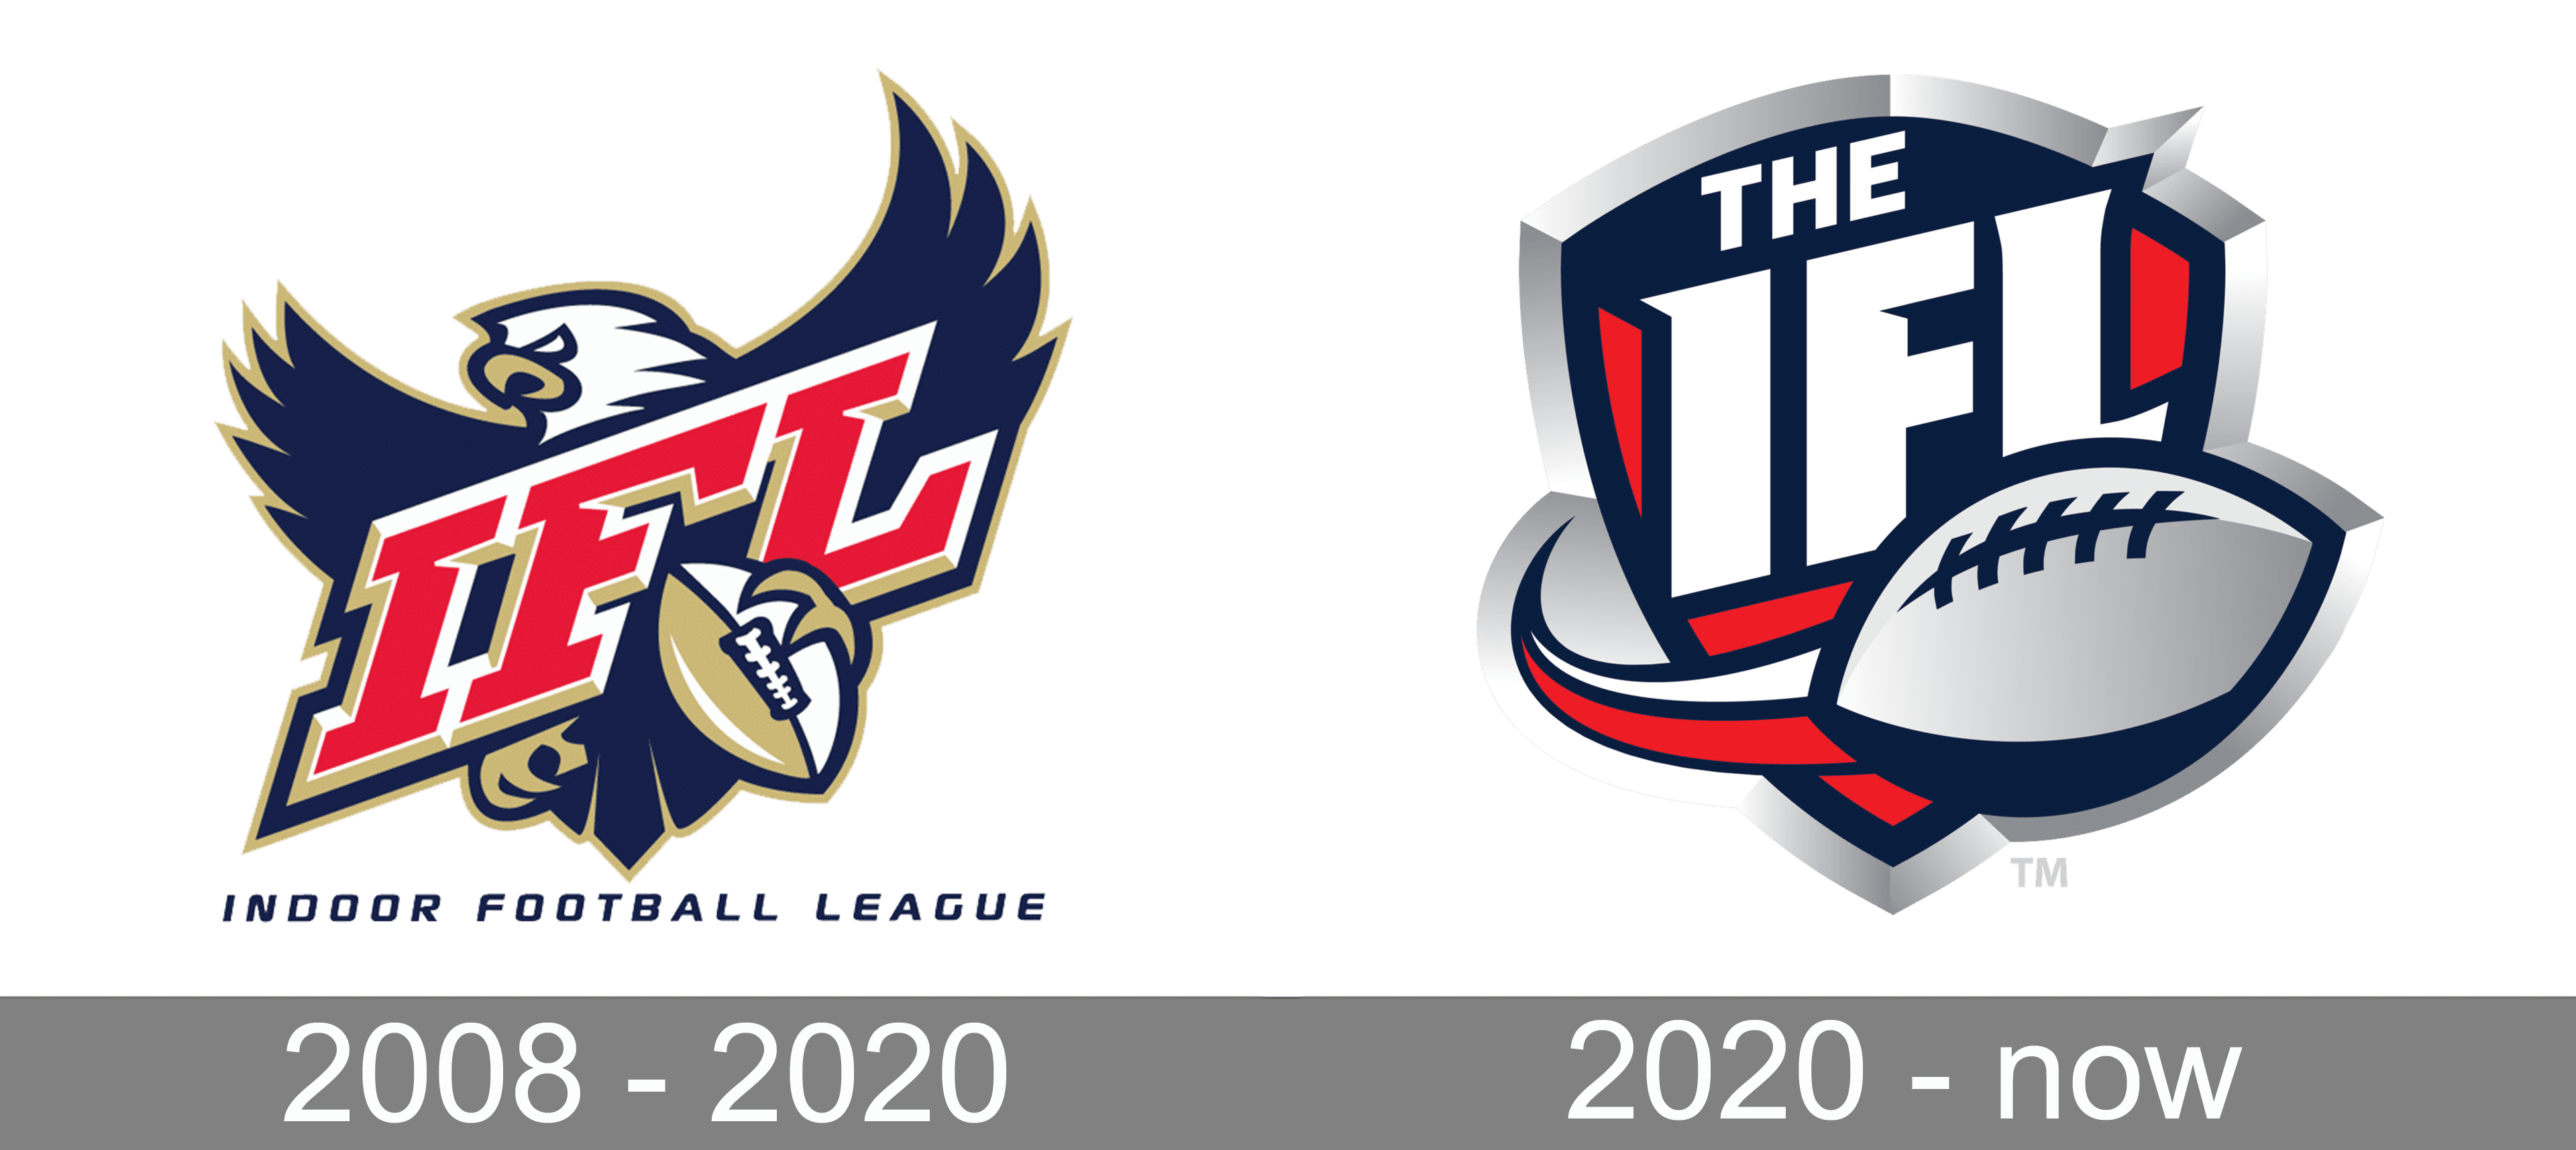 Indoor Football League (IFL) logo and symbol, meaning, history, PNG, brand